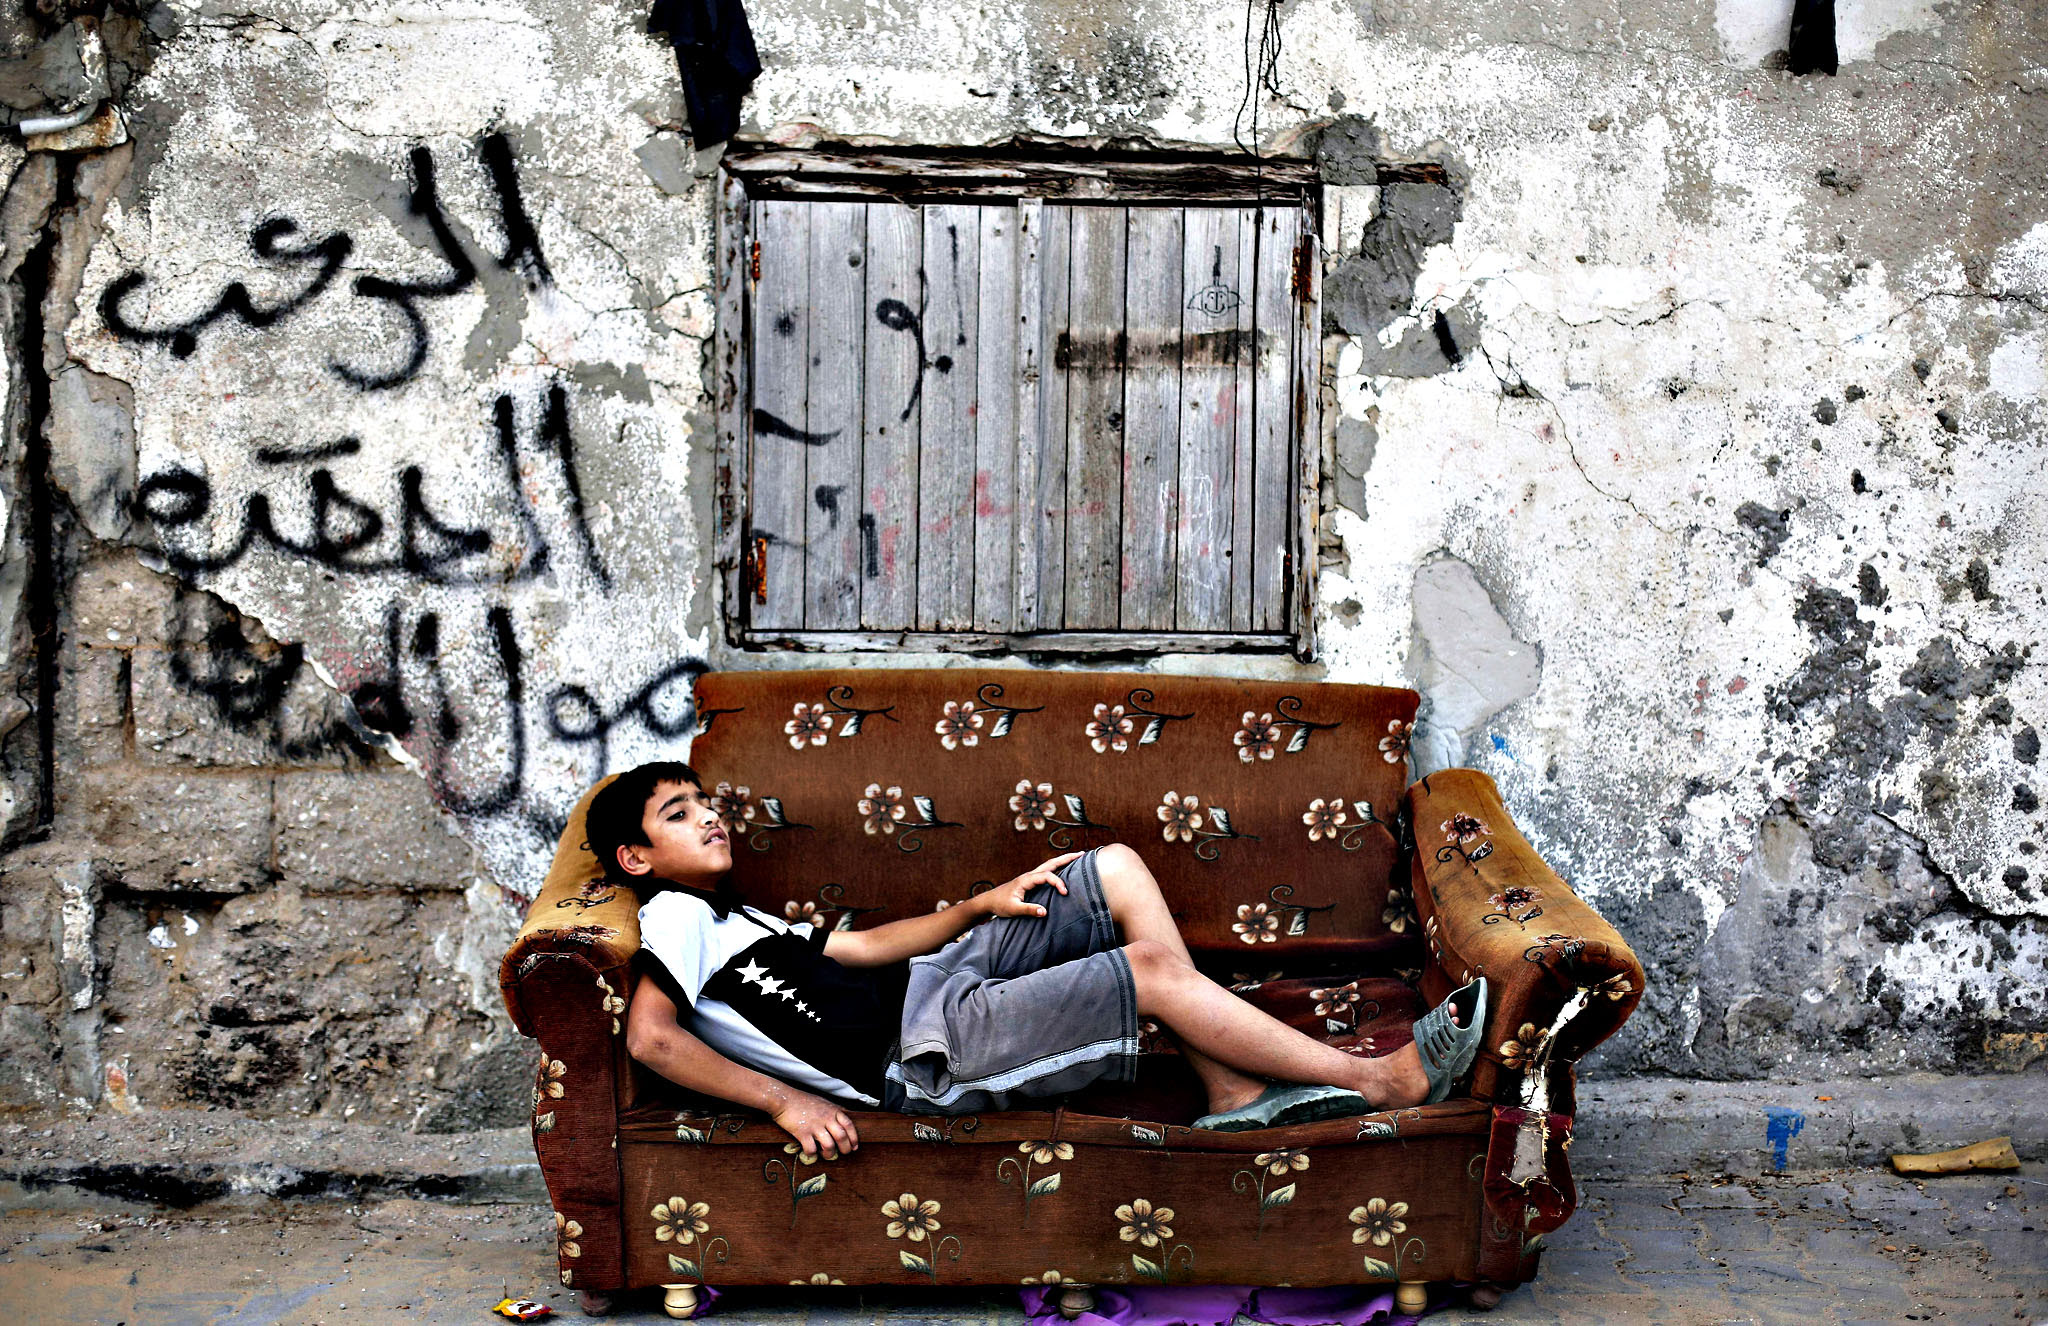 A Palestinian boy rests on an old armcha...A Palestinian boy rests on an old armchair in front of a dilapidated house on May 22, 2015 in Gaza City